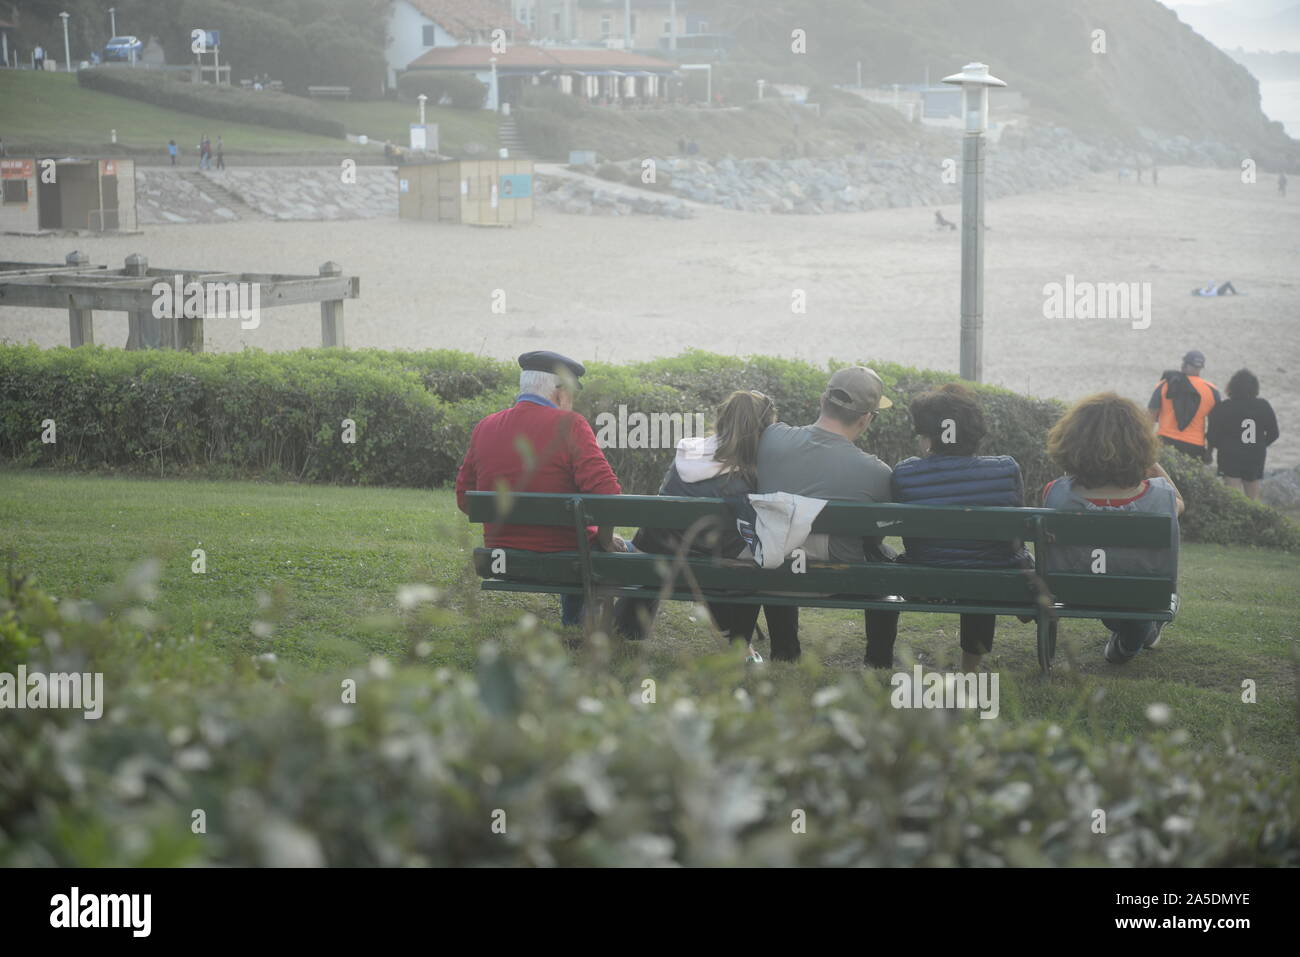 French people on a bench looking out to sea, pasakdek Stock Photo